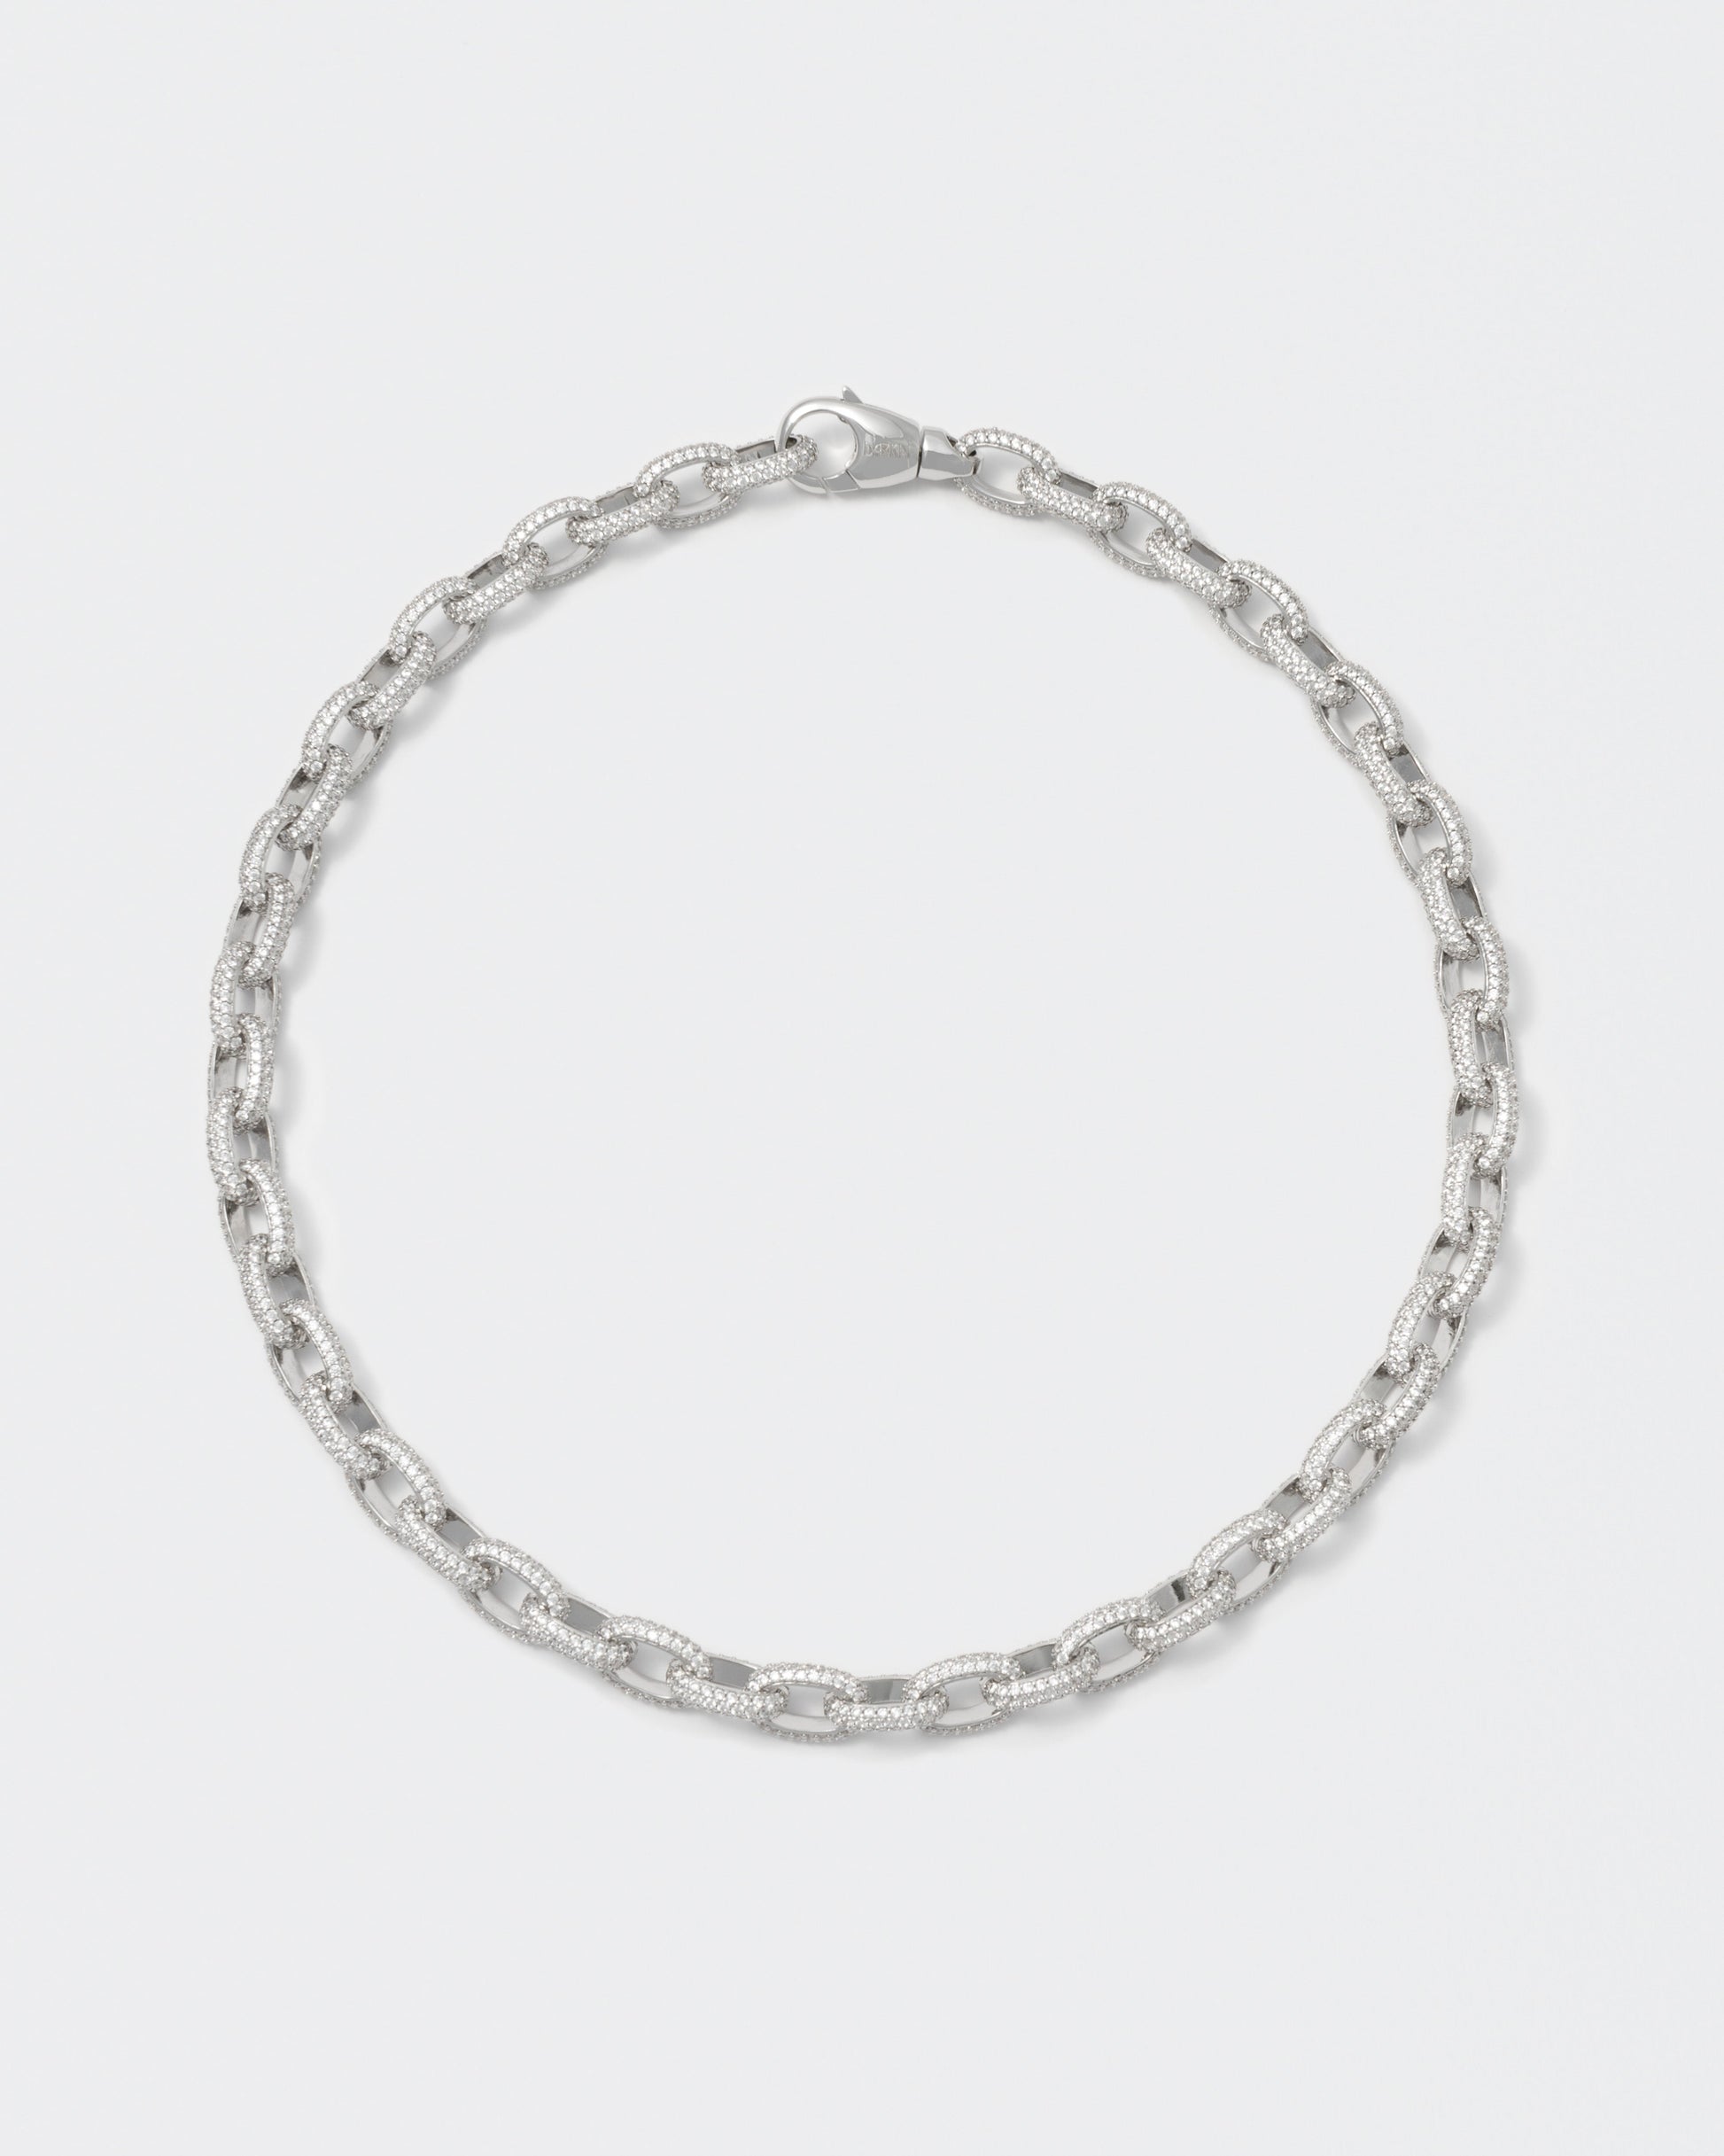 18k white gold coated rolo chain necklace with all-around hand-set micropavé stones in white